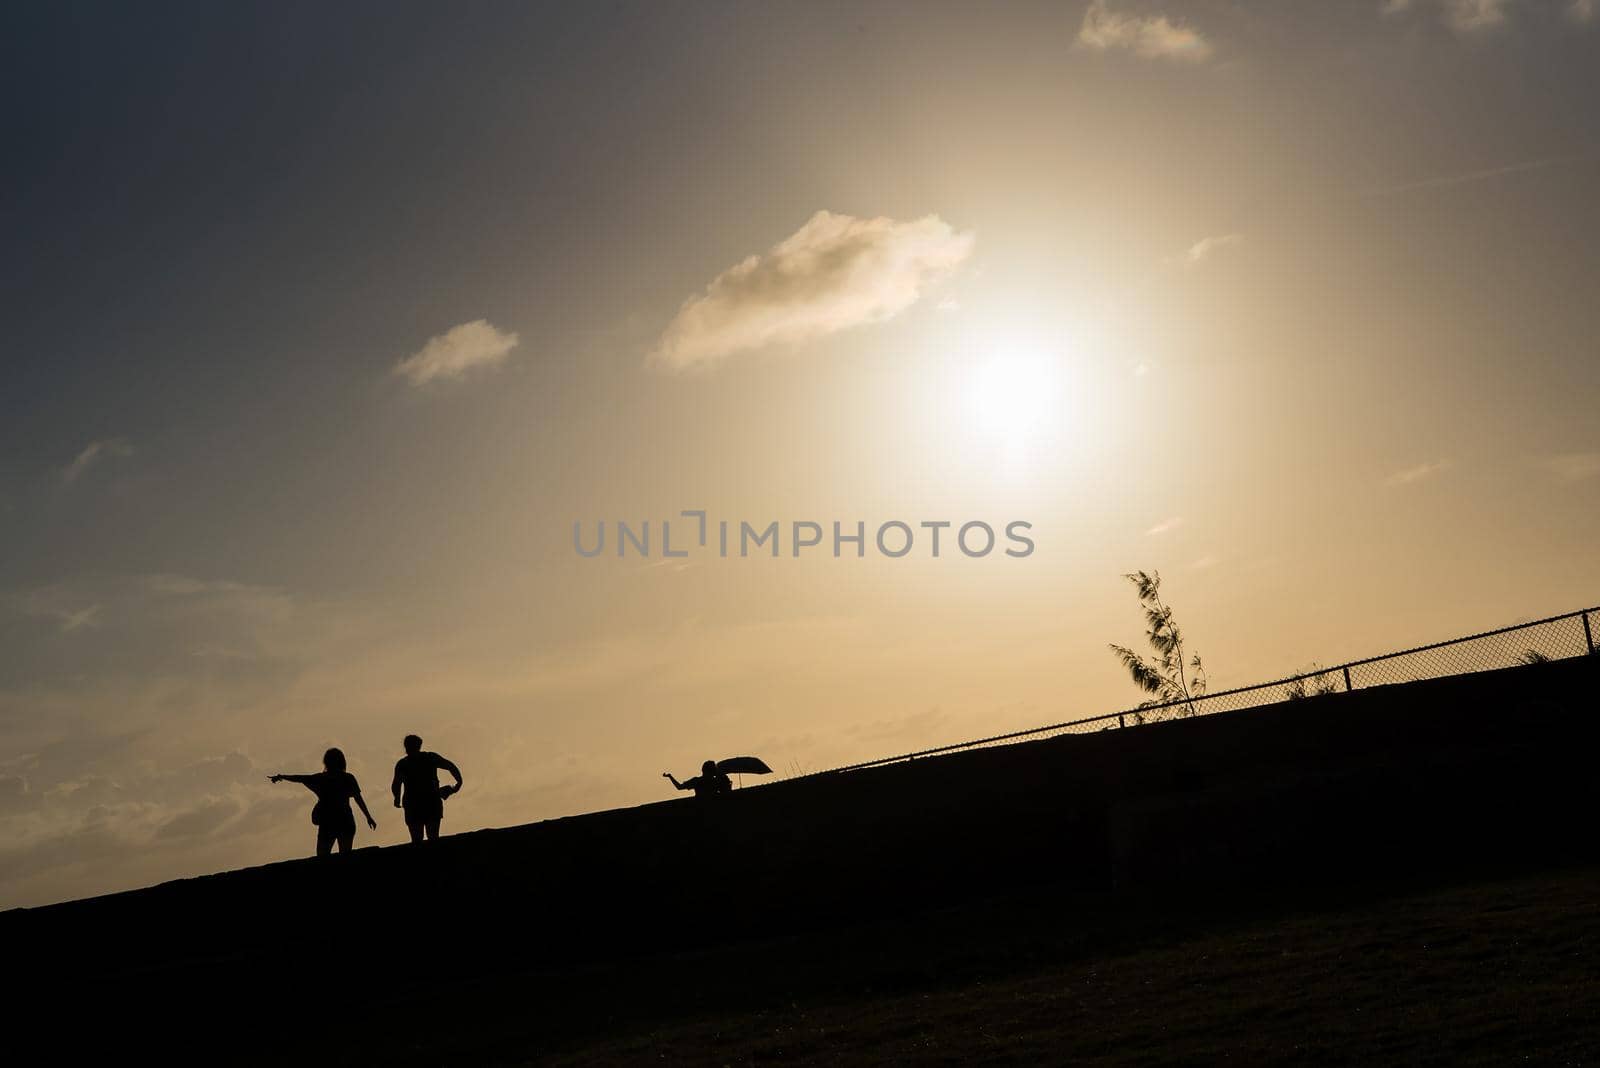 Silhouette lifestyle image of two people standing together with one pointing their finger up during sunset in San Juan, Puerto Rico. Warm tones